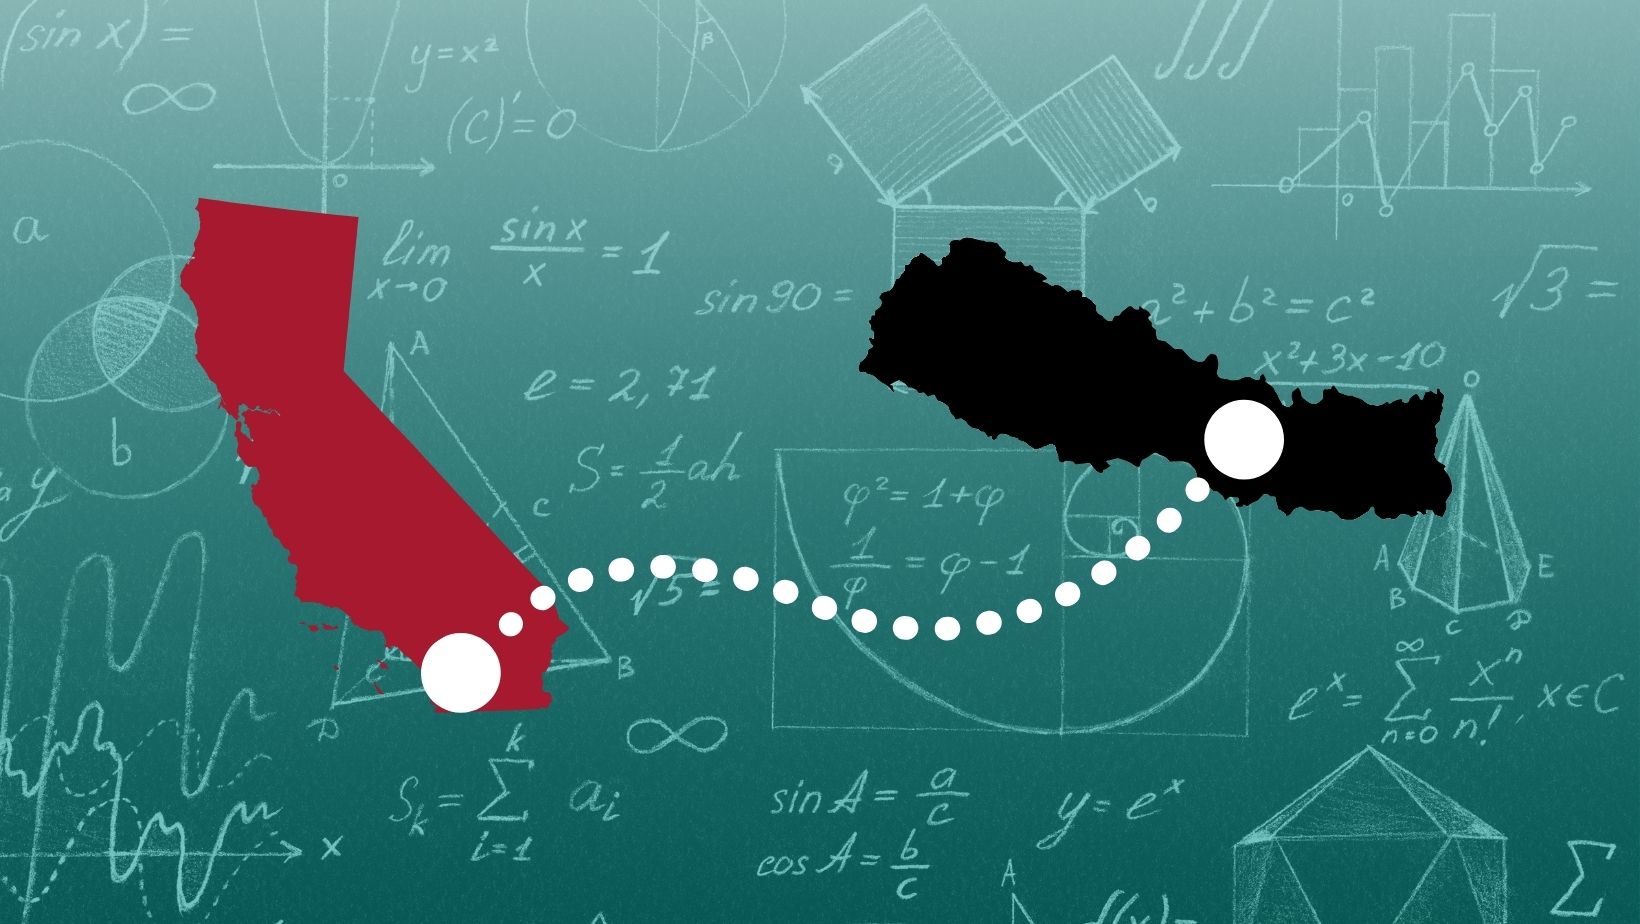 A red outline of California and black outline of Nepal connected by a dotted line on a teal background with mathematical symbols